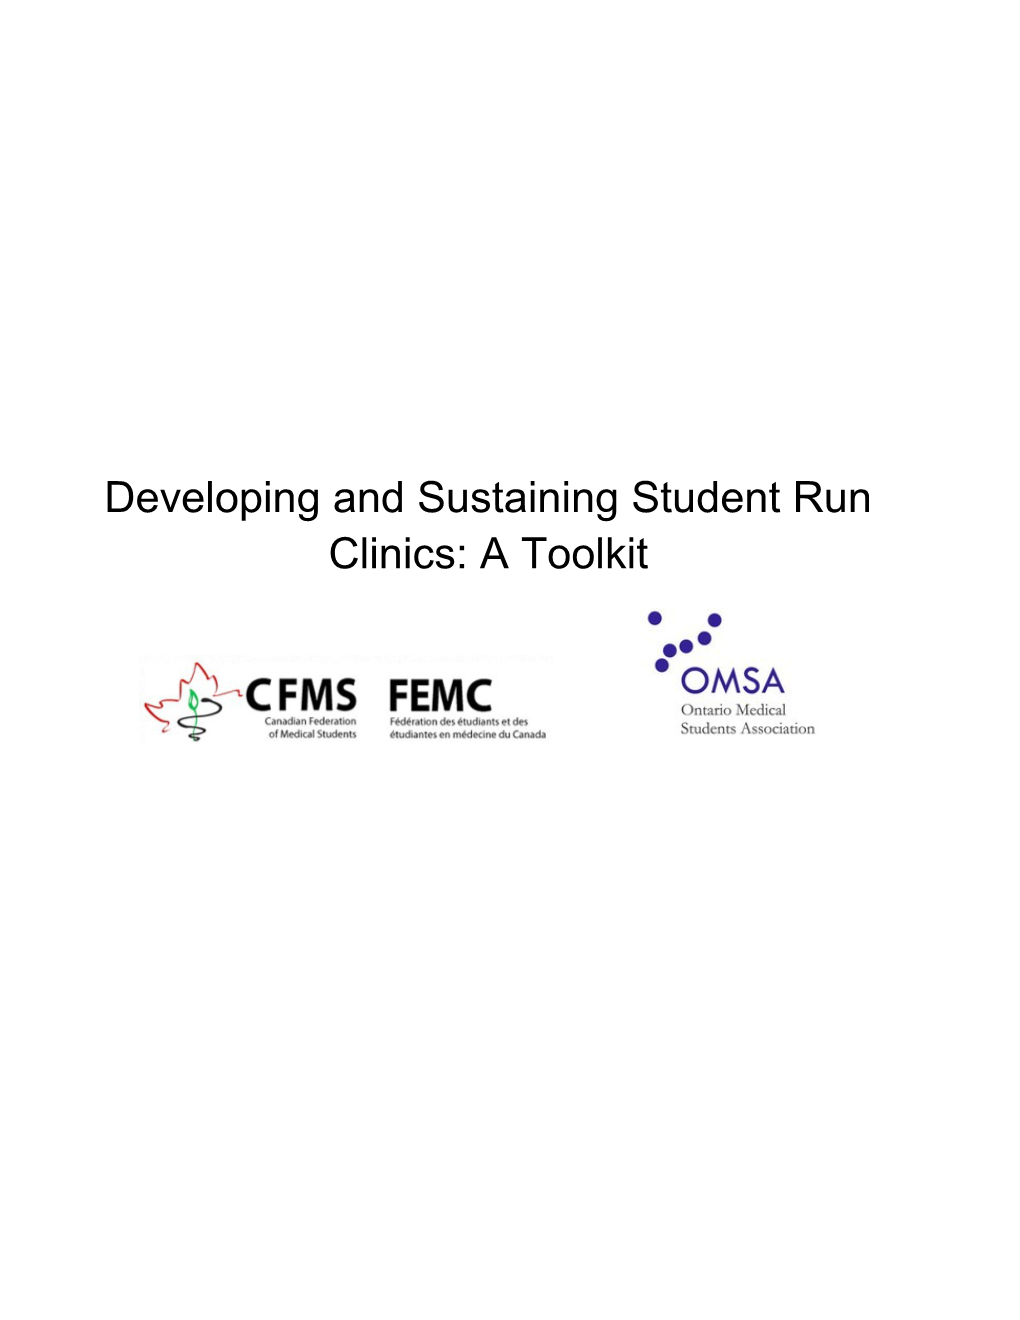 Developing and Sustaining Student Run Clinics: a Toolkit